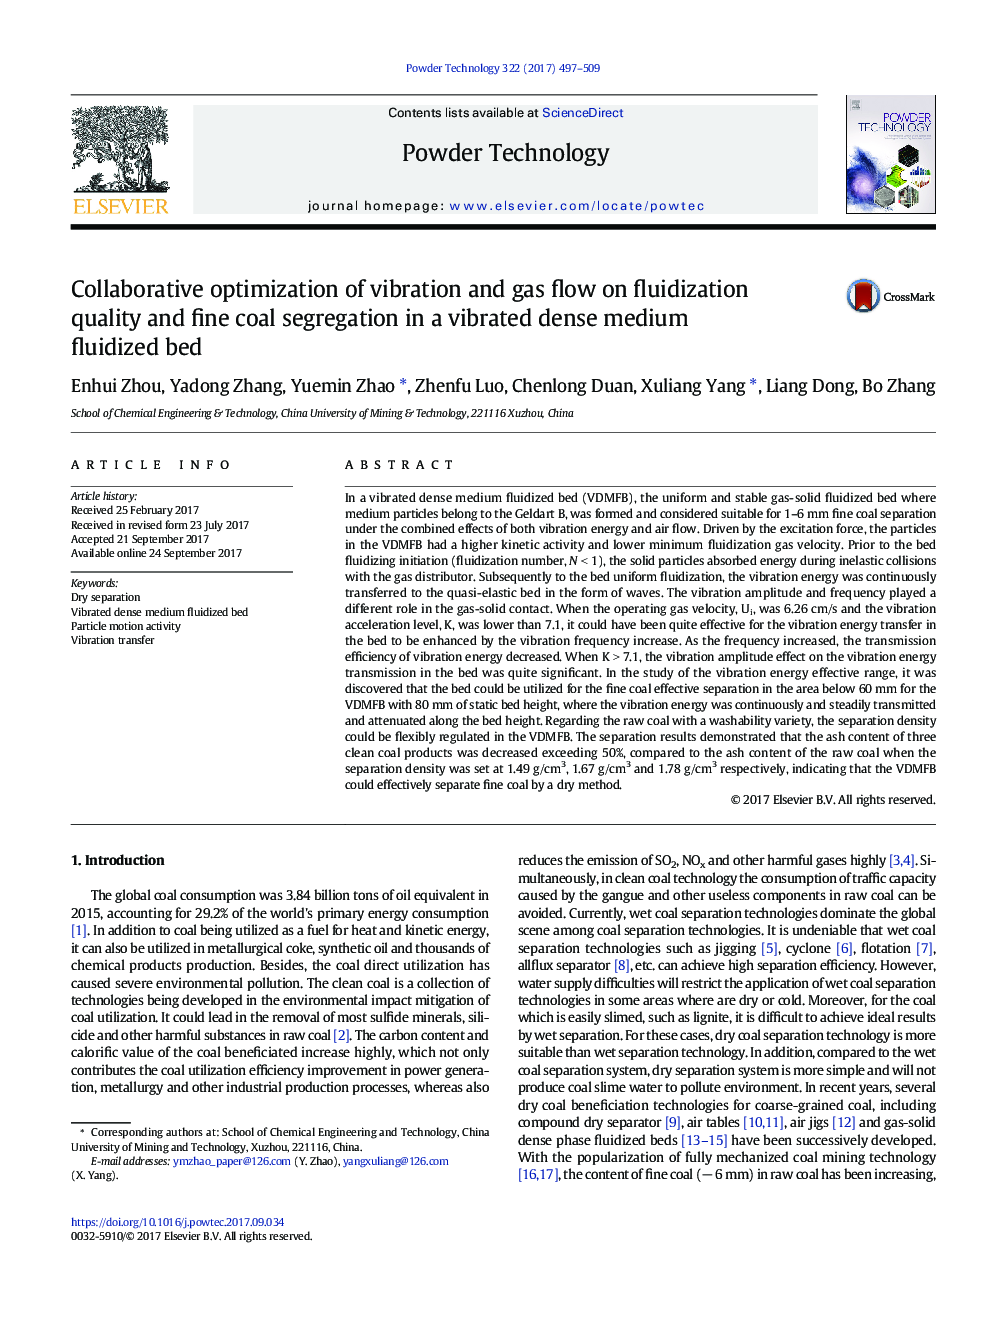 Collaborative optimization of vibration and gas flow on fluidization quality and fine coal segregation in a vibrated dense medium fluidized bed